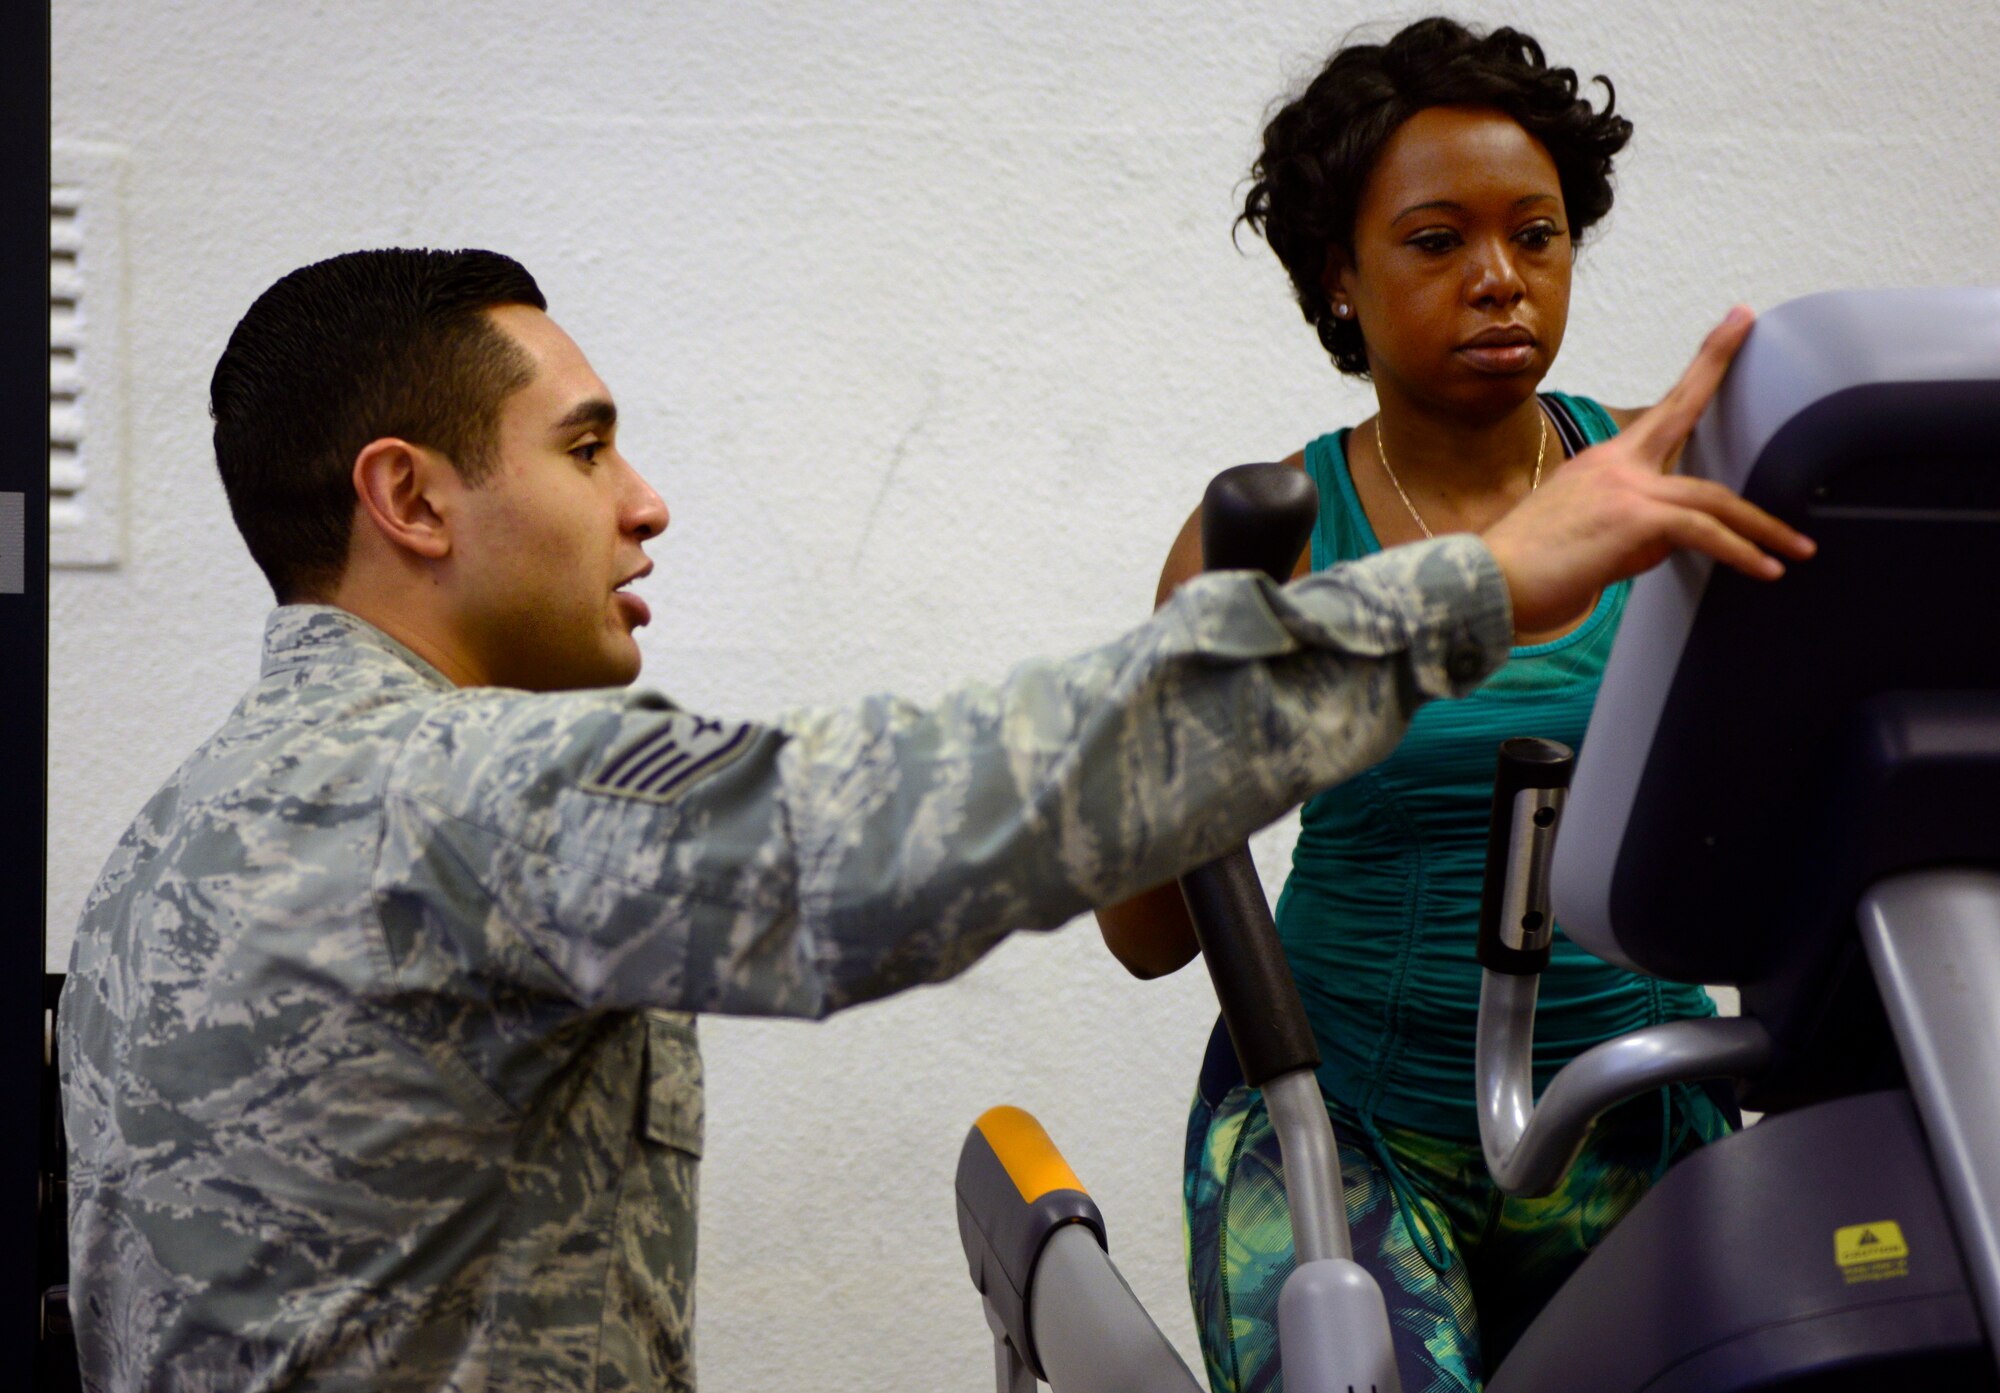 Staff Sgt. Mario Jimenez, 86th Medical Operations Squadron physical therapy technician, helps his patient, Master Sgt. Larnique Mickens, 86th Airlift Wing commander executive, through her physical therapy session Feb. 3, 2016, at Ramstein Air Base, Germany. Physical therapists take care of other Airmen in this process of recovery from an injury, helping them return to full fitness. (U.S. Air Force photo/Tech. Sgt. Kristopher Levasseur)